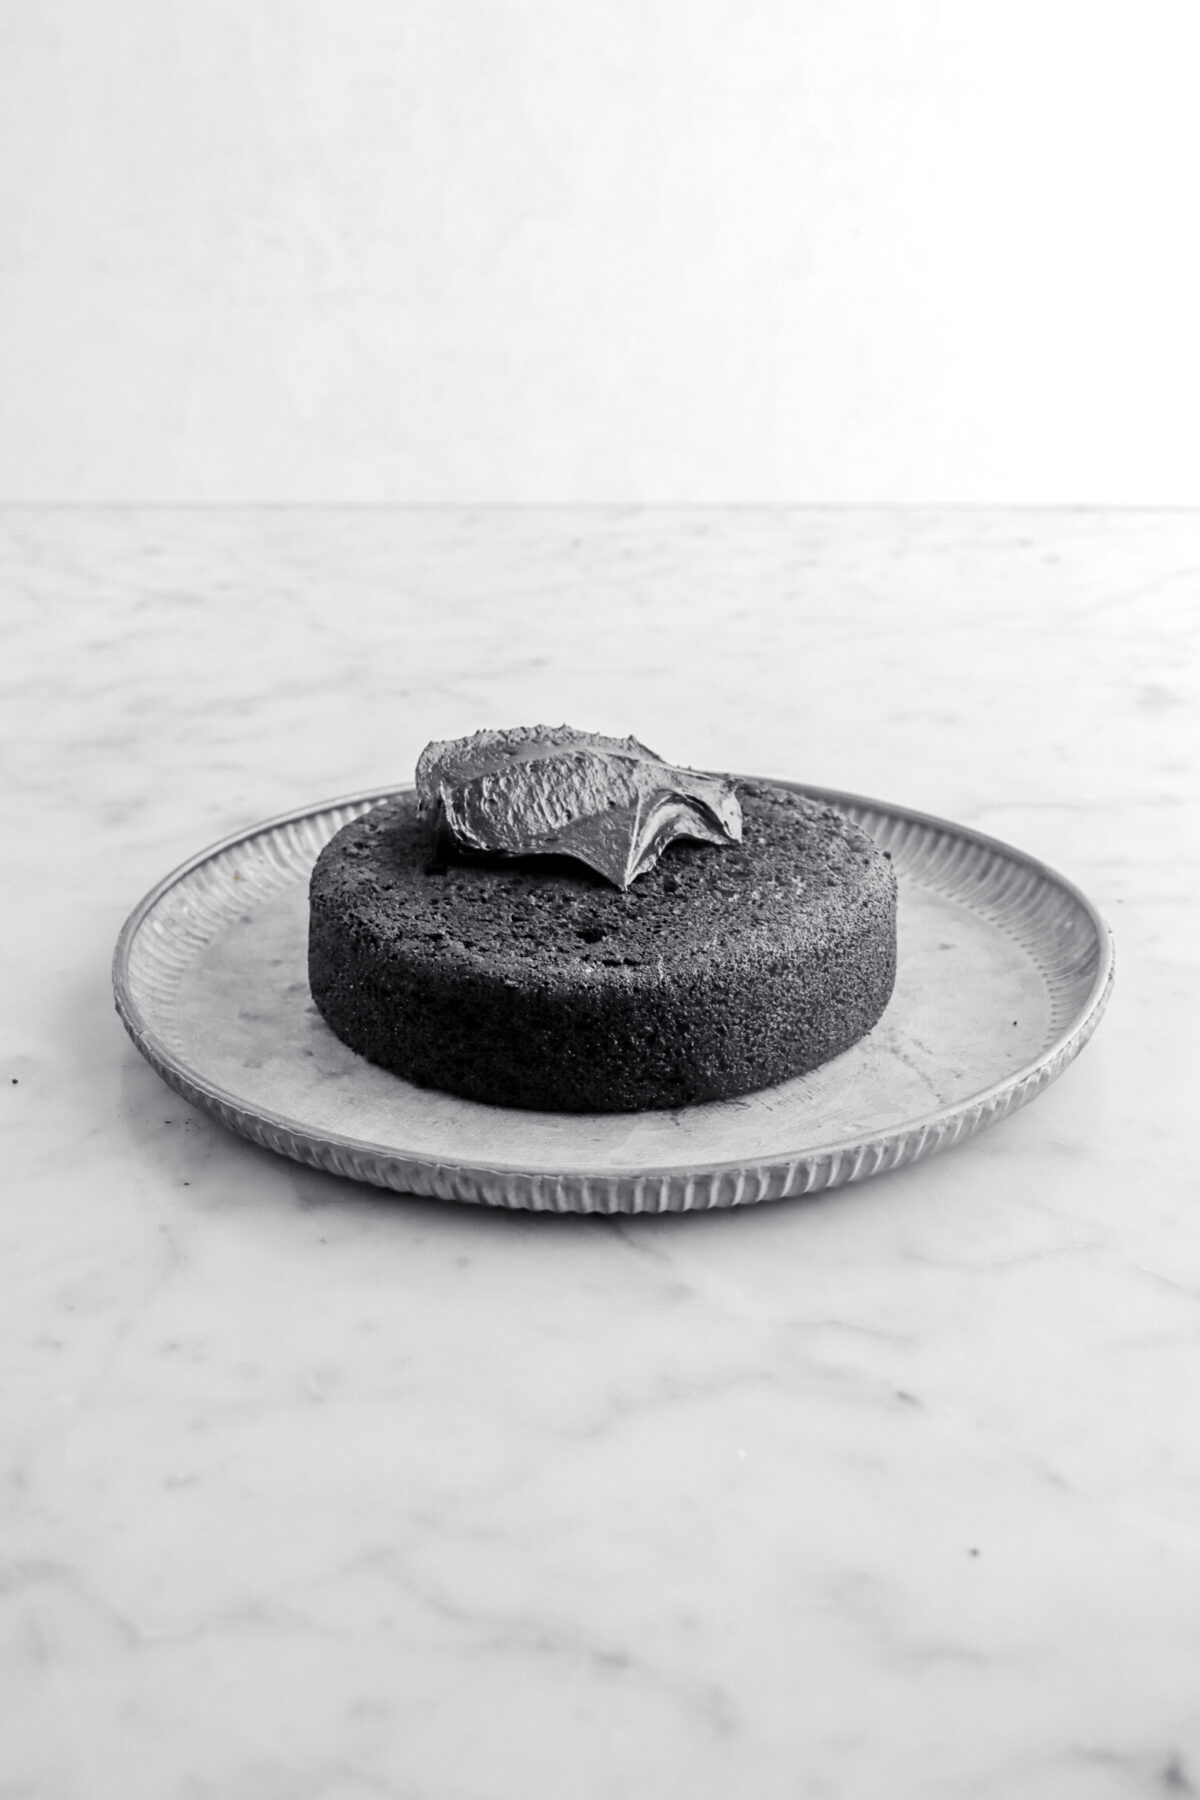 cake layer with black frosting on top of metal plate on marble surface.